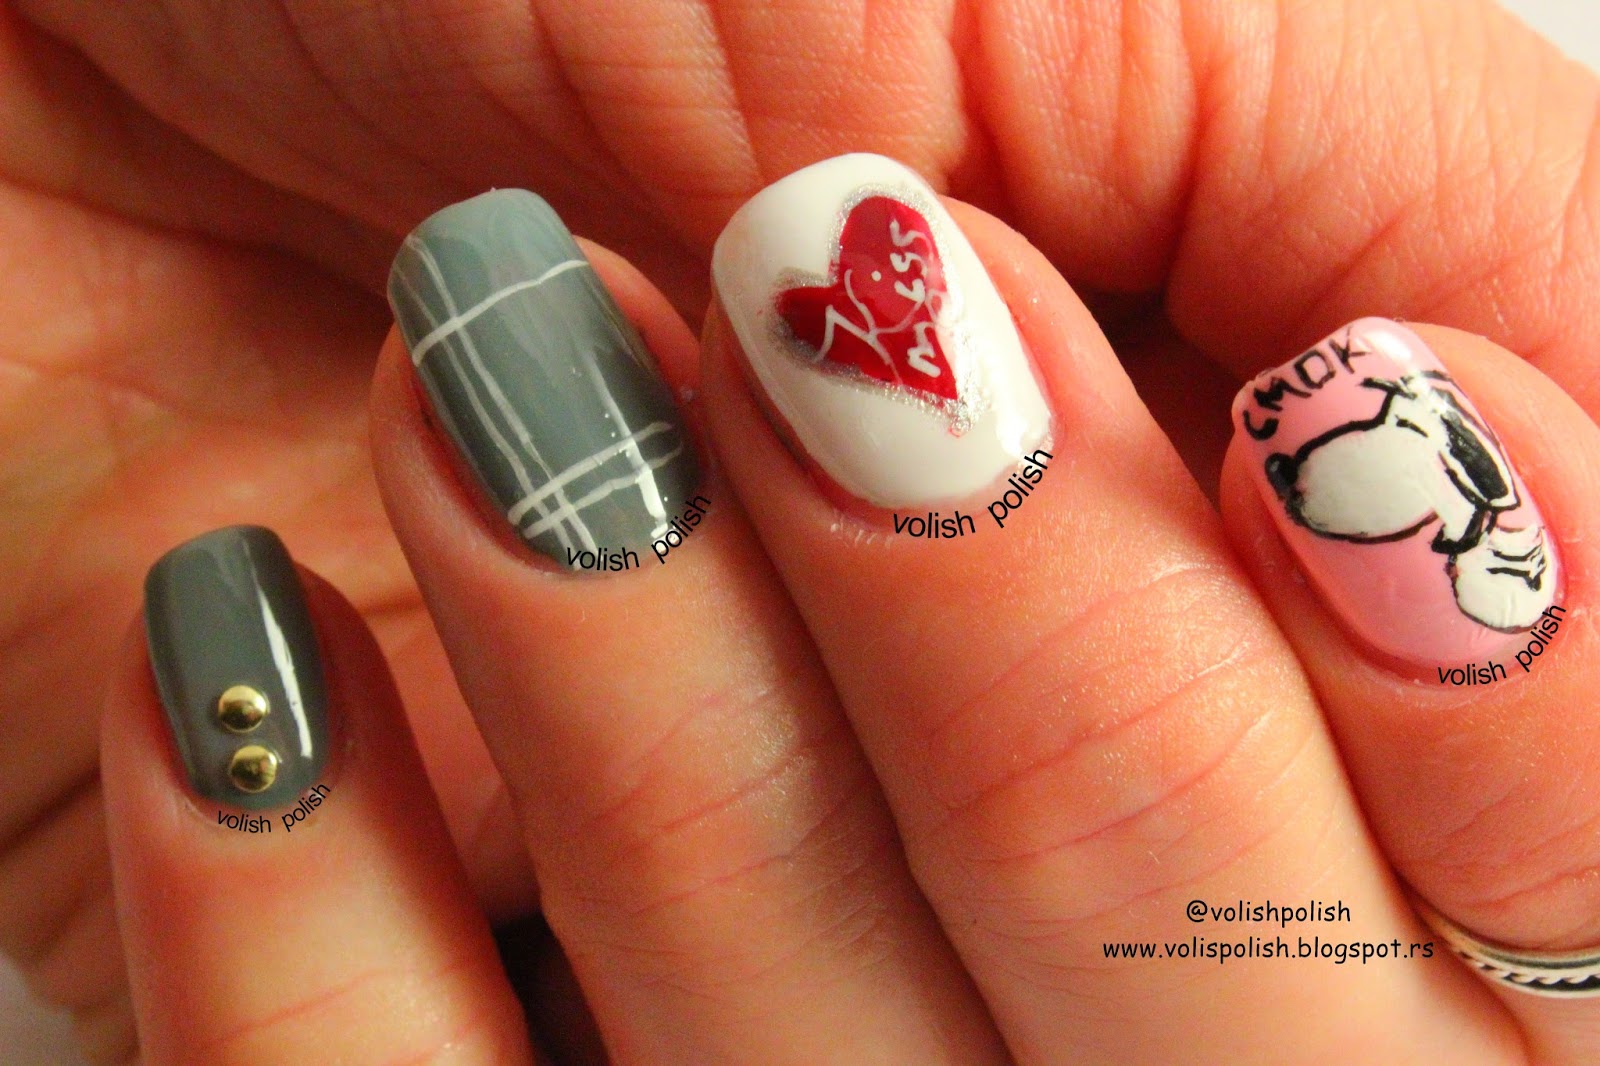 1. Snoopy Nail Art Tutorial - wide 6